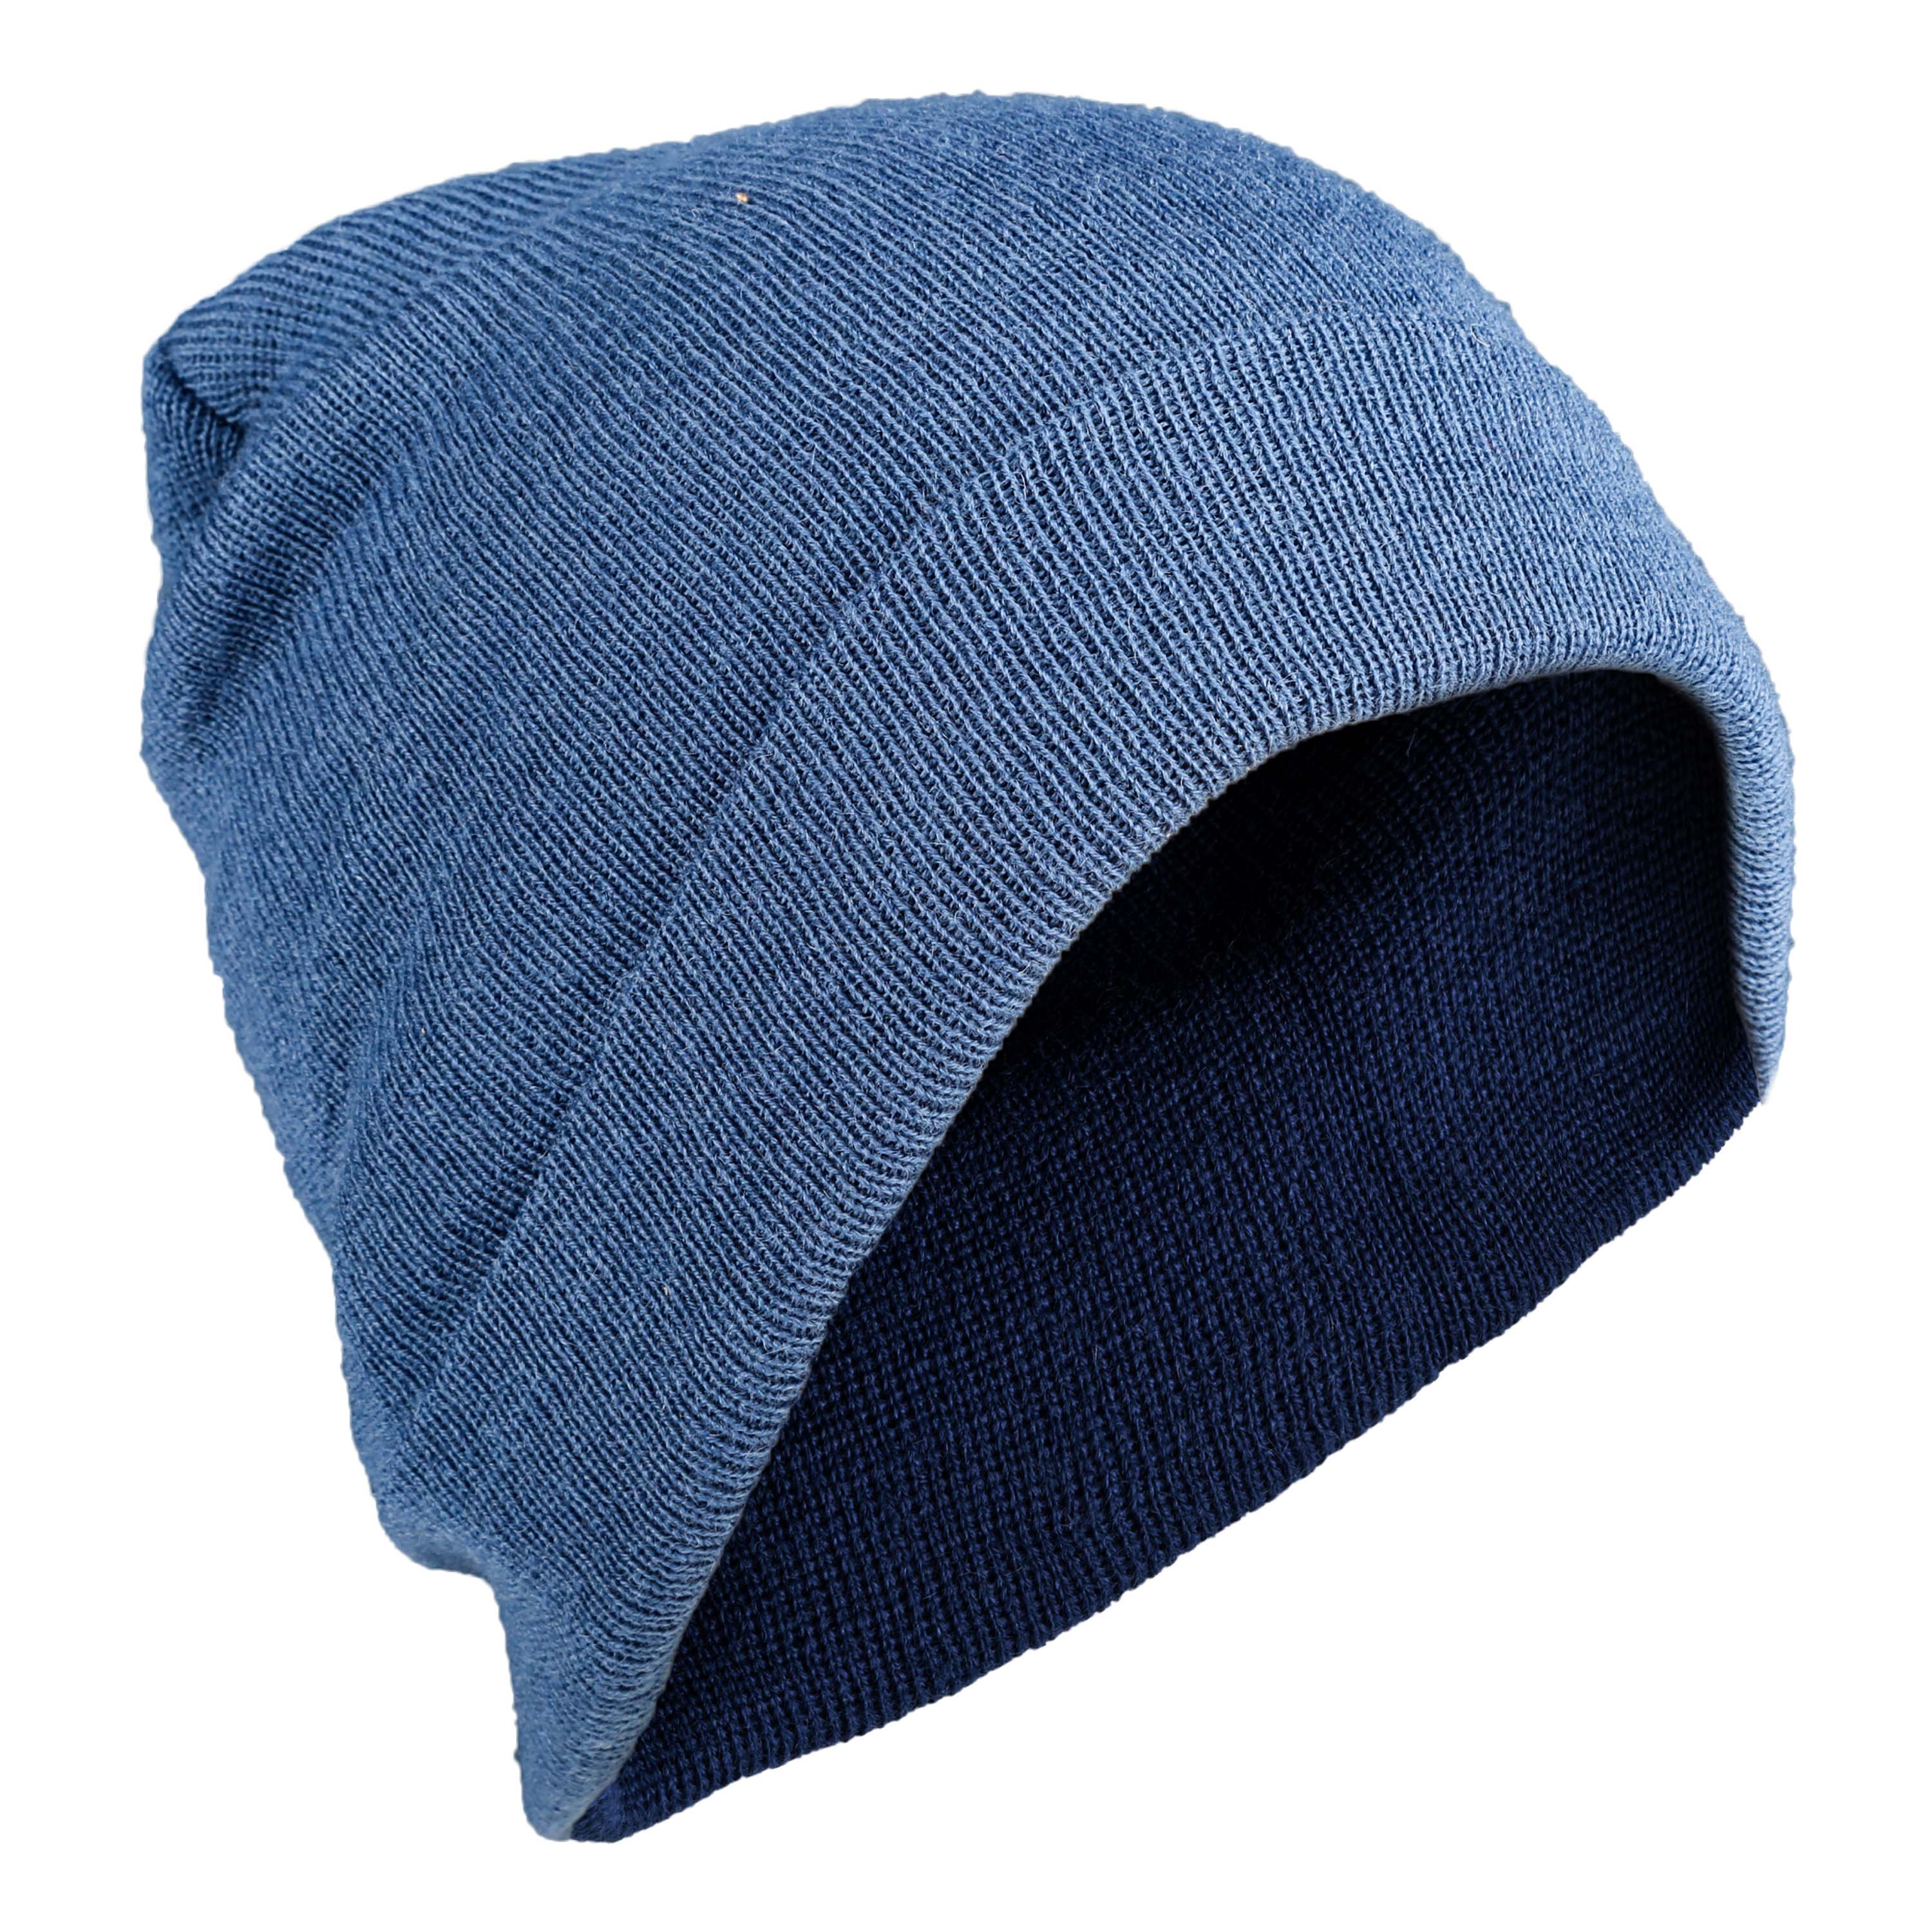 Knitted Wool Cap royal blue